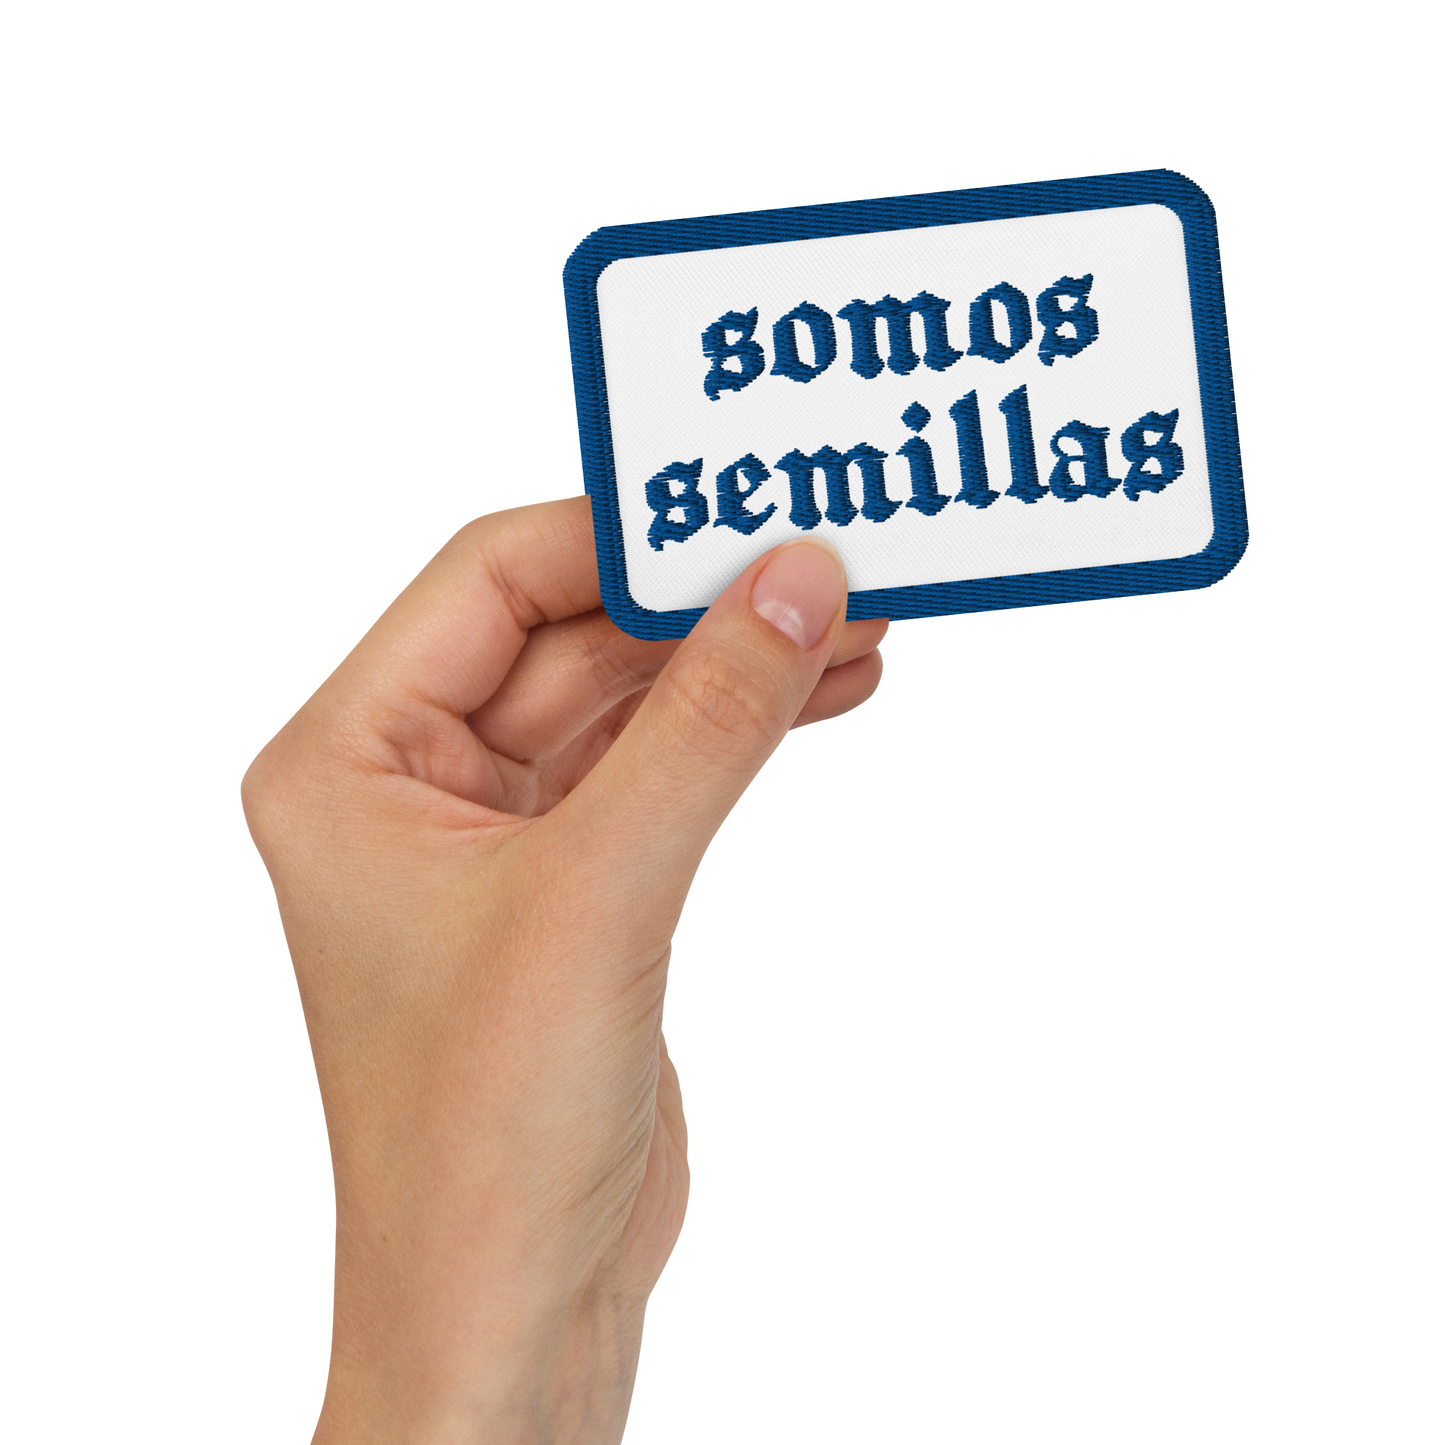 Somos semillas - Embroidered patch